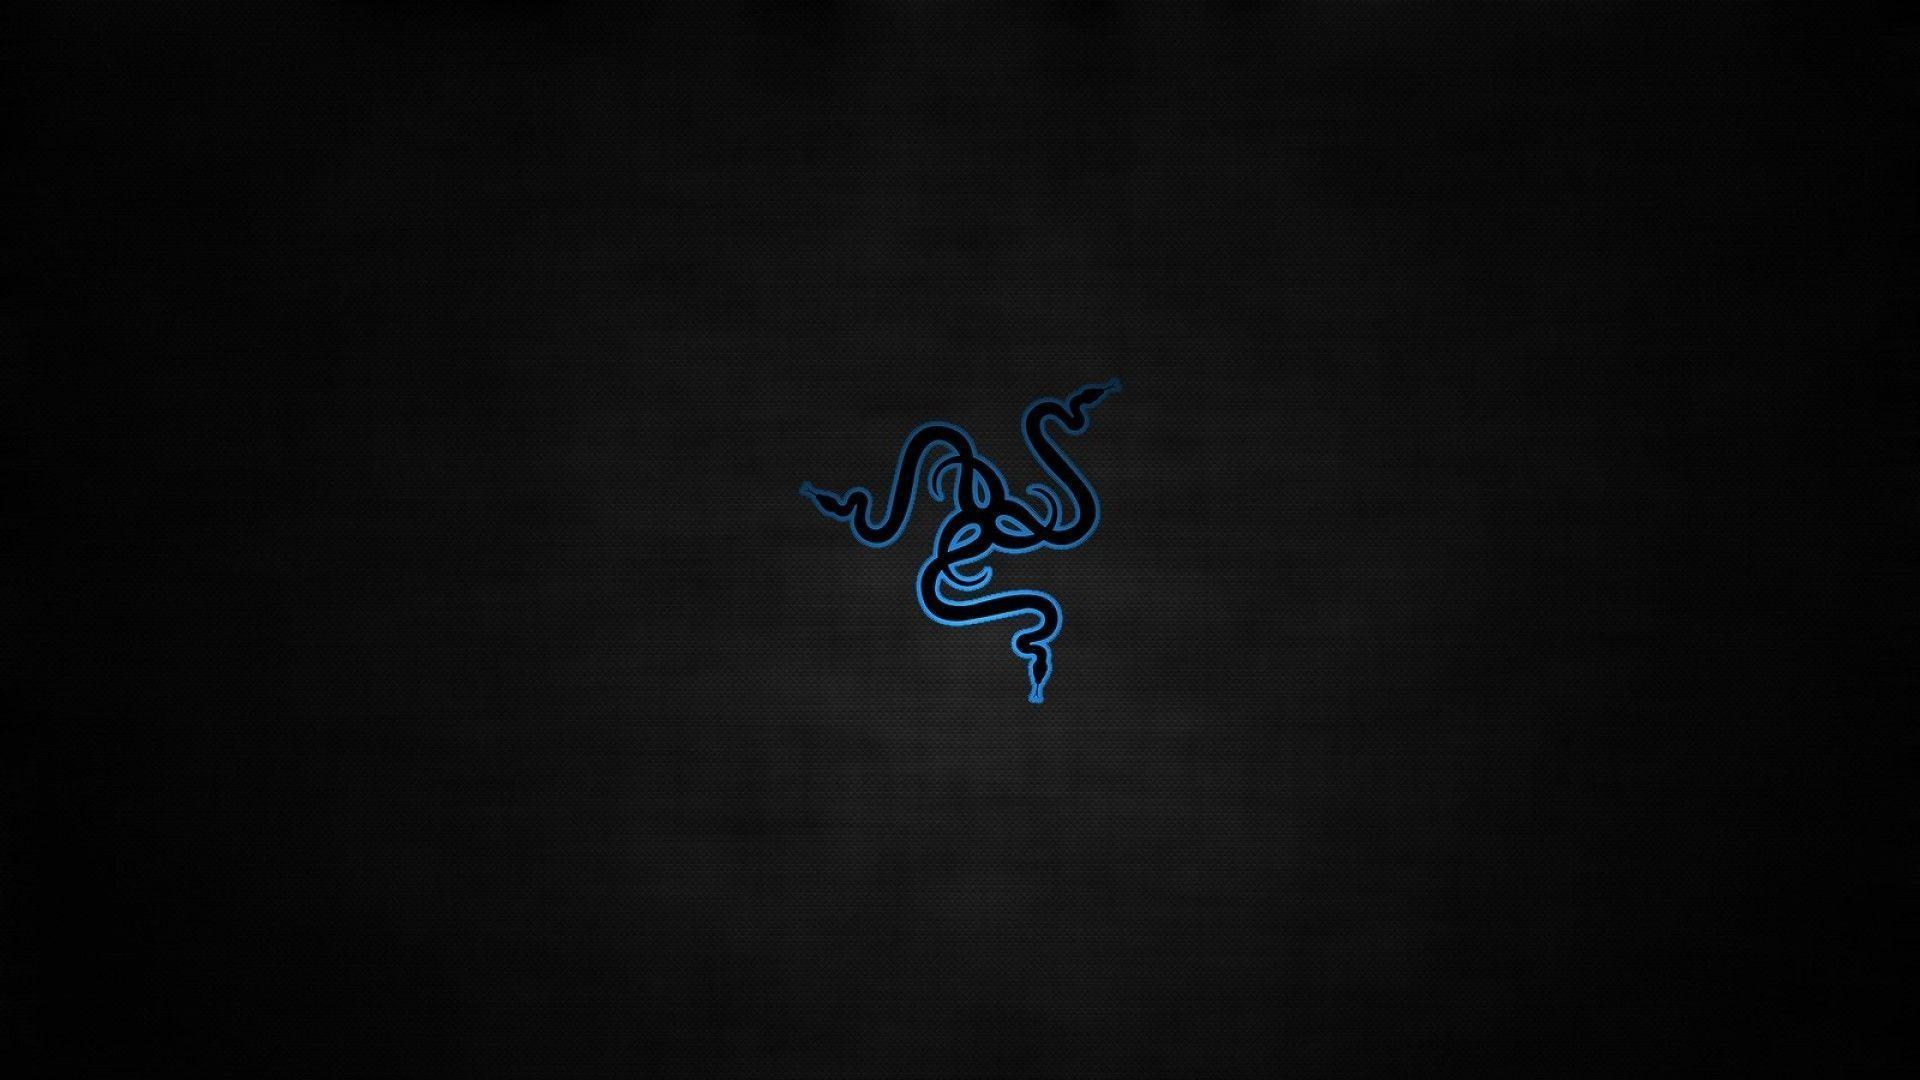 Wallpapers For > Razer Wallpapers Blue 1920x1080